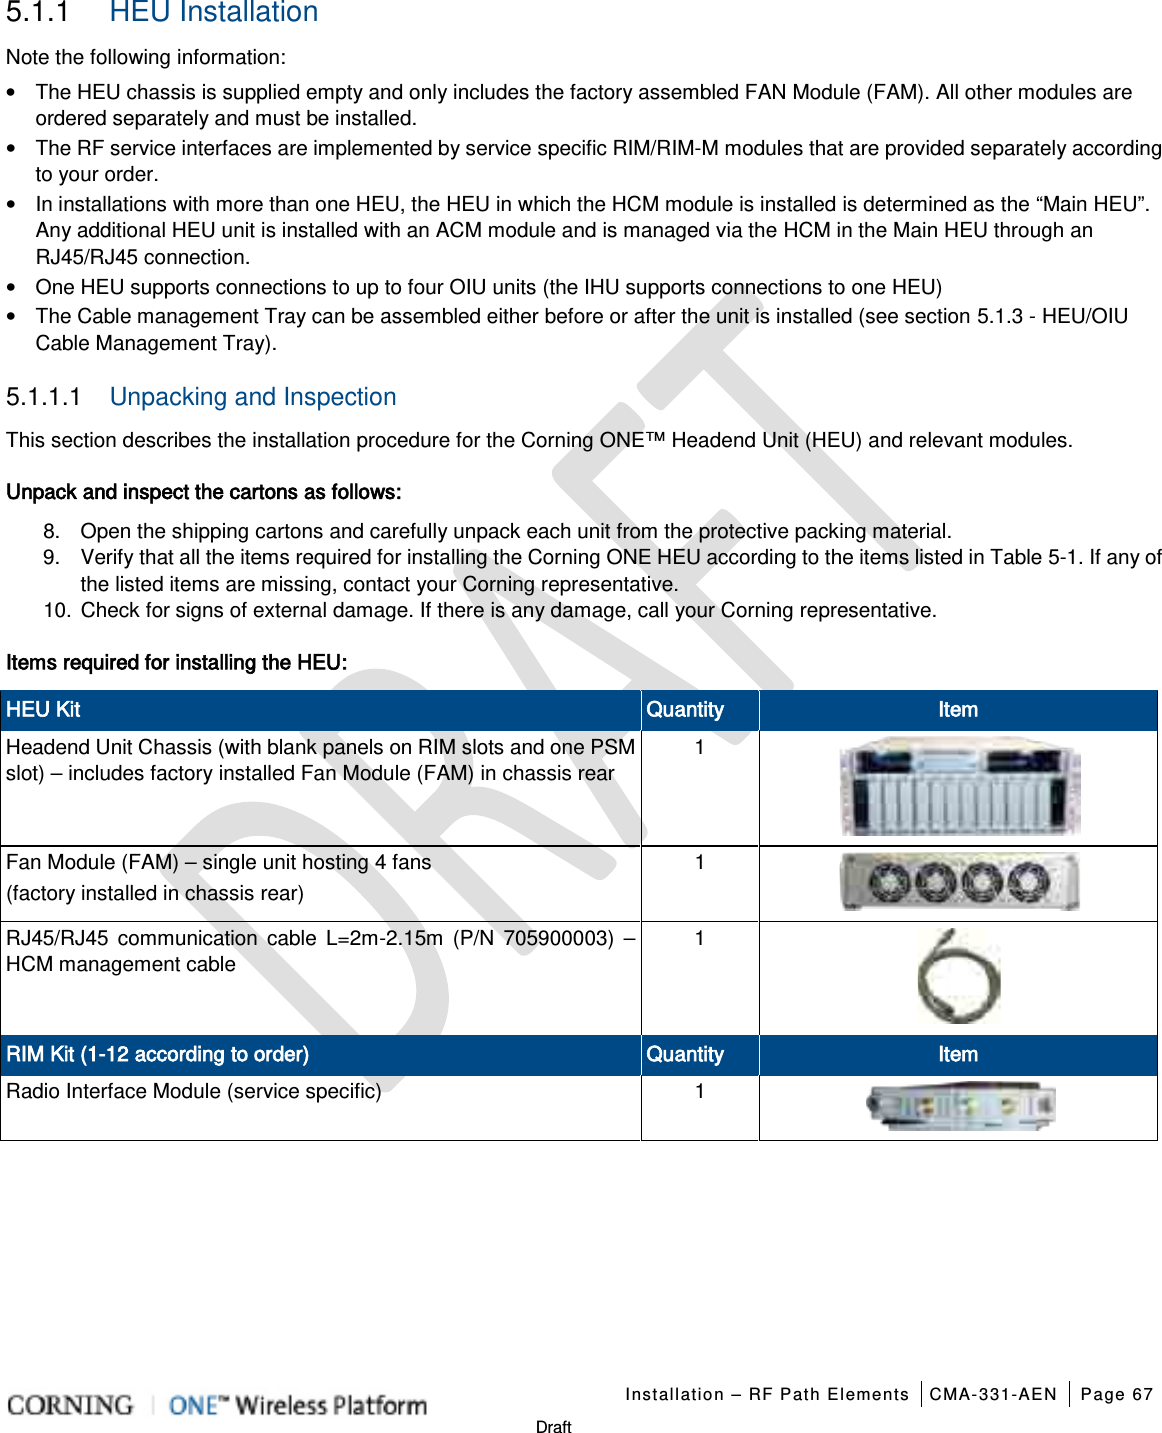   Installation – RF Path Elements CMA-331-AEN Page 67   Draft 5.1.1  HEU Installation Note the following information: • The HEU chassis is supplied empty and only includes the factory assembled FAN Module (FAM). All other modules are ordered separately and must be installed. • The RF service interfaces are implemented by service specific RIM/RIM-M modules that are provided separately according to your order. • In installations with more than one HEU, the HEU in which the HCM module is installed is determined as the “Main HEU”. Any additional HEU unit is installed with an ACM module and is managed via the HCM in the Main HEU through an RJ45/RJ45 connection. • One HEU supports connections to up to four OIU units (the IHU supports connections to one HEU) • The Cable management Tray can be assembled either before or after the unit is installed (see section  5.1.3 - HEU/OIU Cable Management Tray). 5.1.1.1  Unpacking and Inspection This section describes the installation procedure for the Corning ONE™ Headend Unit (HEU) and relevant modules.   Unpack and inspect the cartons as follows: 8.  Open the shipping cartons and carefully unpack each unit from the protective packing material. 9.  Verify that all the items required for installing the Corning ONE HEU according to the items listed in Table  5-1. If any of the listed items are missing, contact your Corning representative.  10. Check for signs of external damage. If there is any damage, call your Corning representative. Items required for installing the HEU: HEU Kit Quantity Item Headend Unit Chassis (with blank panels on RIM slots and one PSM slot) – includes factory installed Fan Module (FAM) in chassis rear 1  Fan Module (FAM) – single unit hosting 4 fans   (factory installed in chassis rear) 1  RJ45/RJ45 communication cable L=2m-2.15m (P/N 705900003) – HCM management cable 1  RIM Kit (1-12 according to order) Quantity Item Radio Interface Module (service specific)  1     